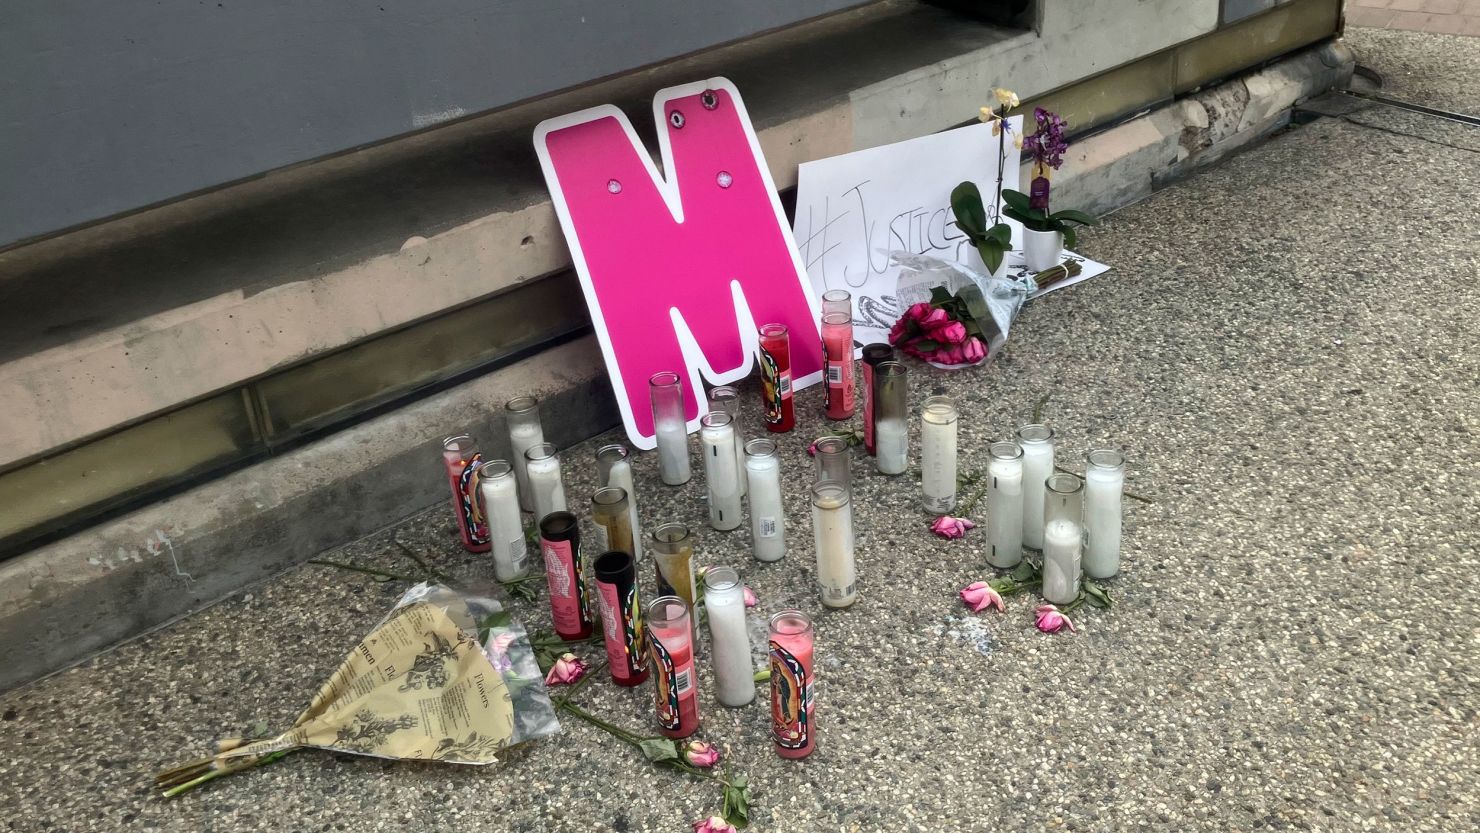 A street-side memorial for Maleesa Mooney, who was found beaten, bound and stuffed inside the refrigerator of her downtown Los Angeles apartment, police say.